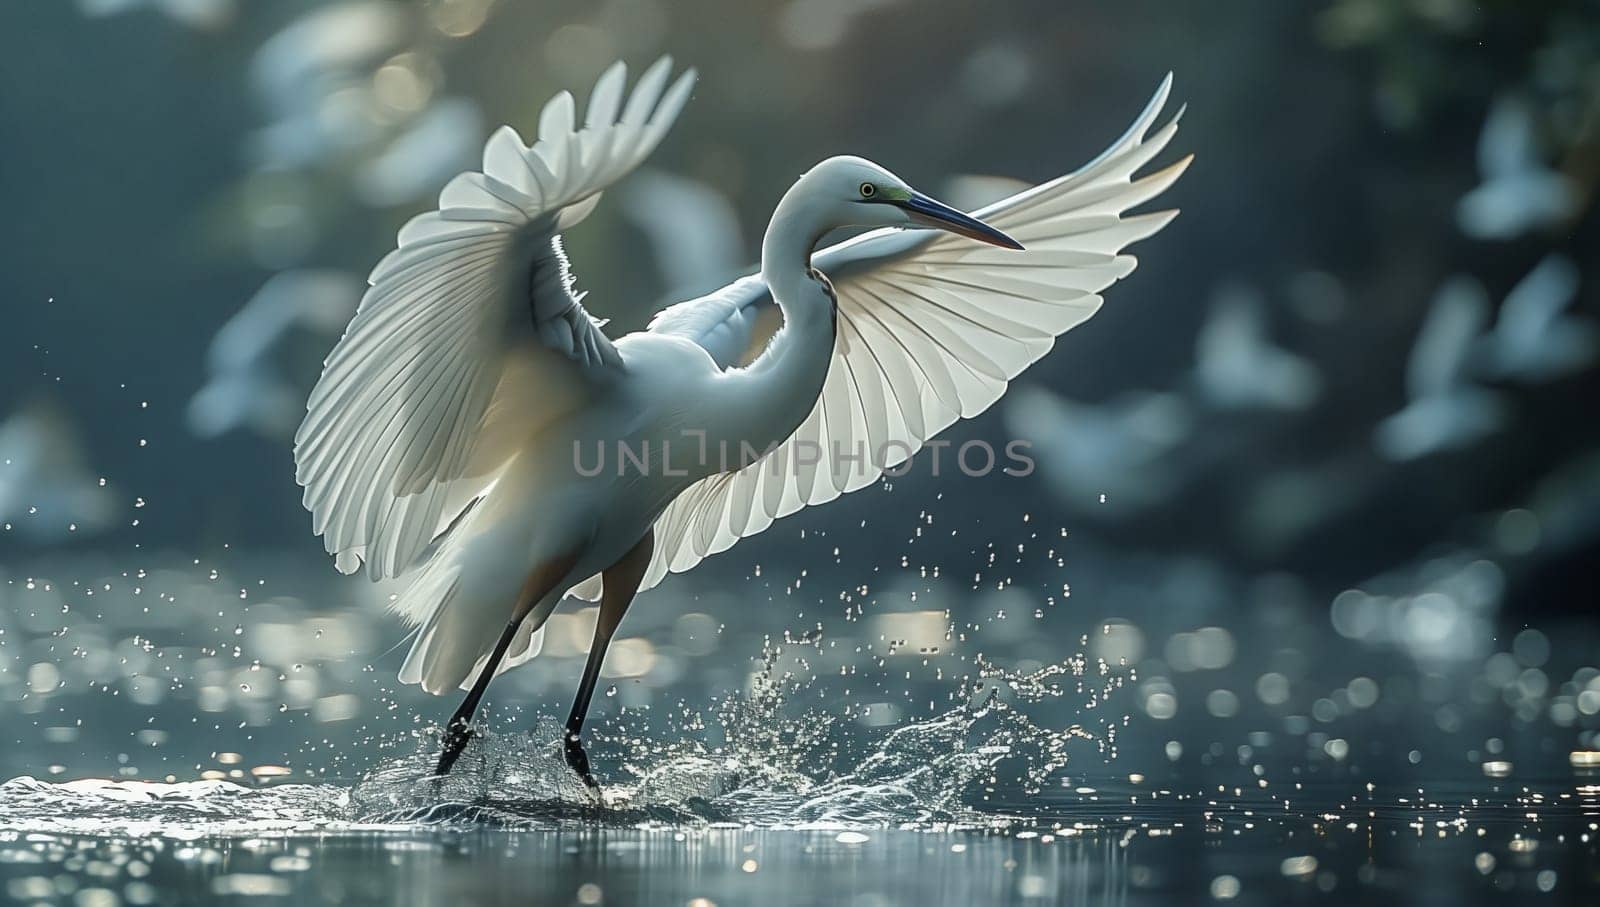 A majestic white heron stands gracefully in the water, its wings outstretched, showcasing its beautiful feathers. This elegant seabird belongs to the Ciconiiformes and Pelecaniformes orders